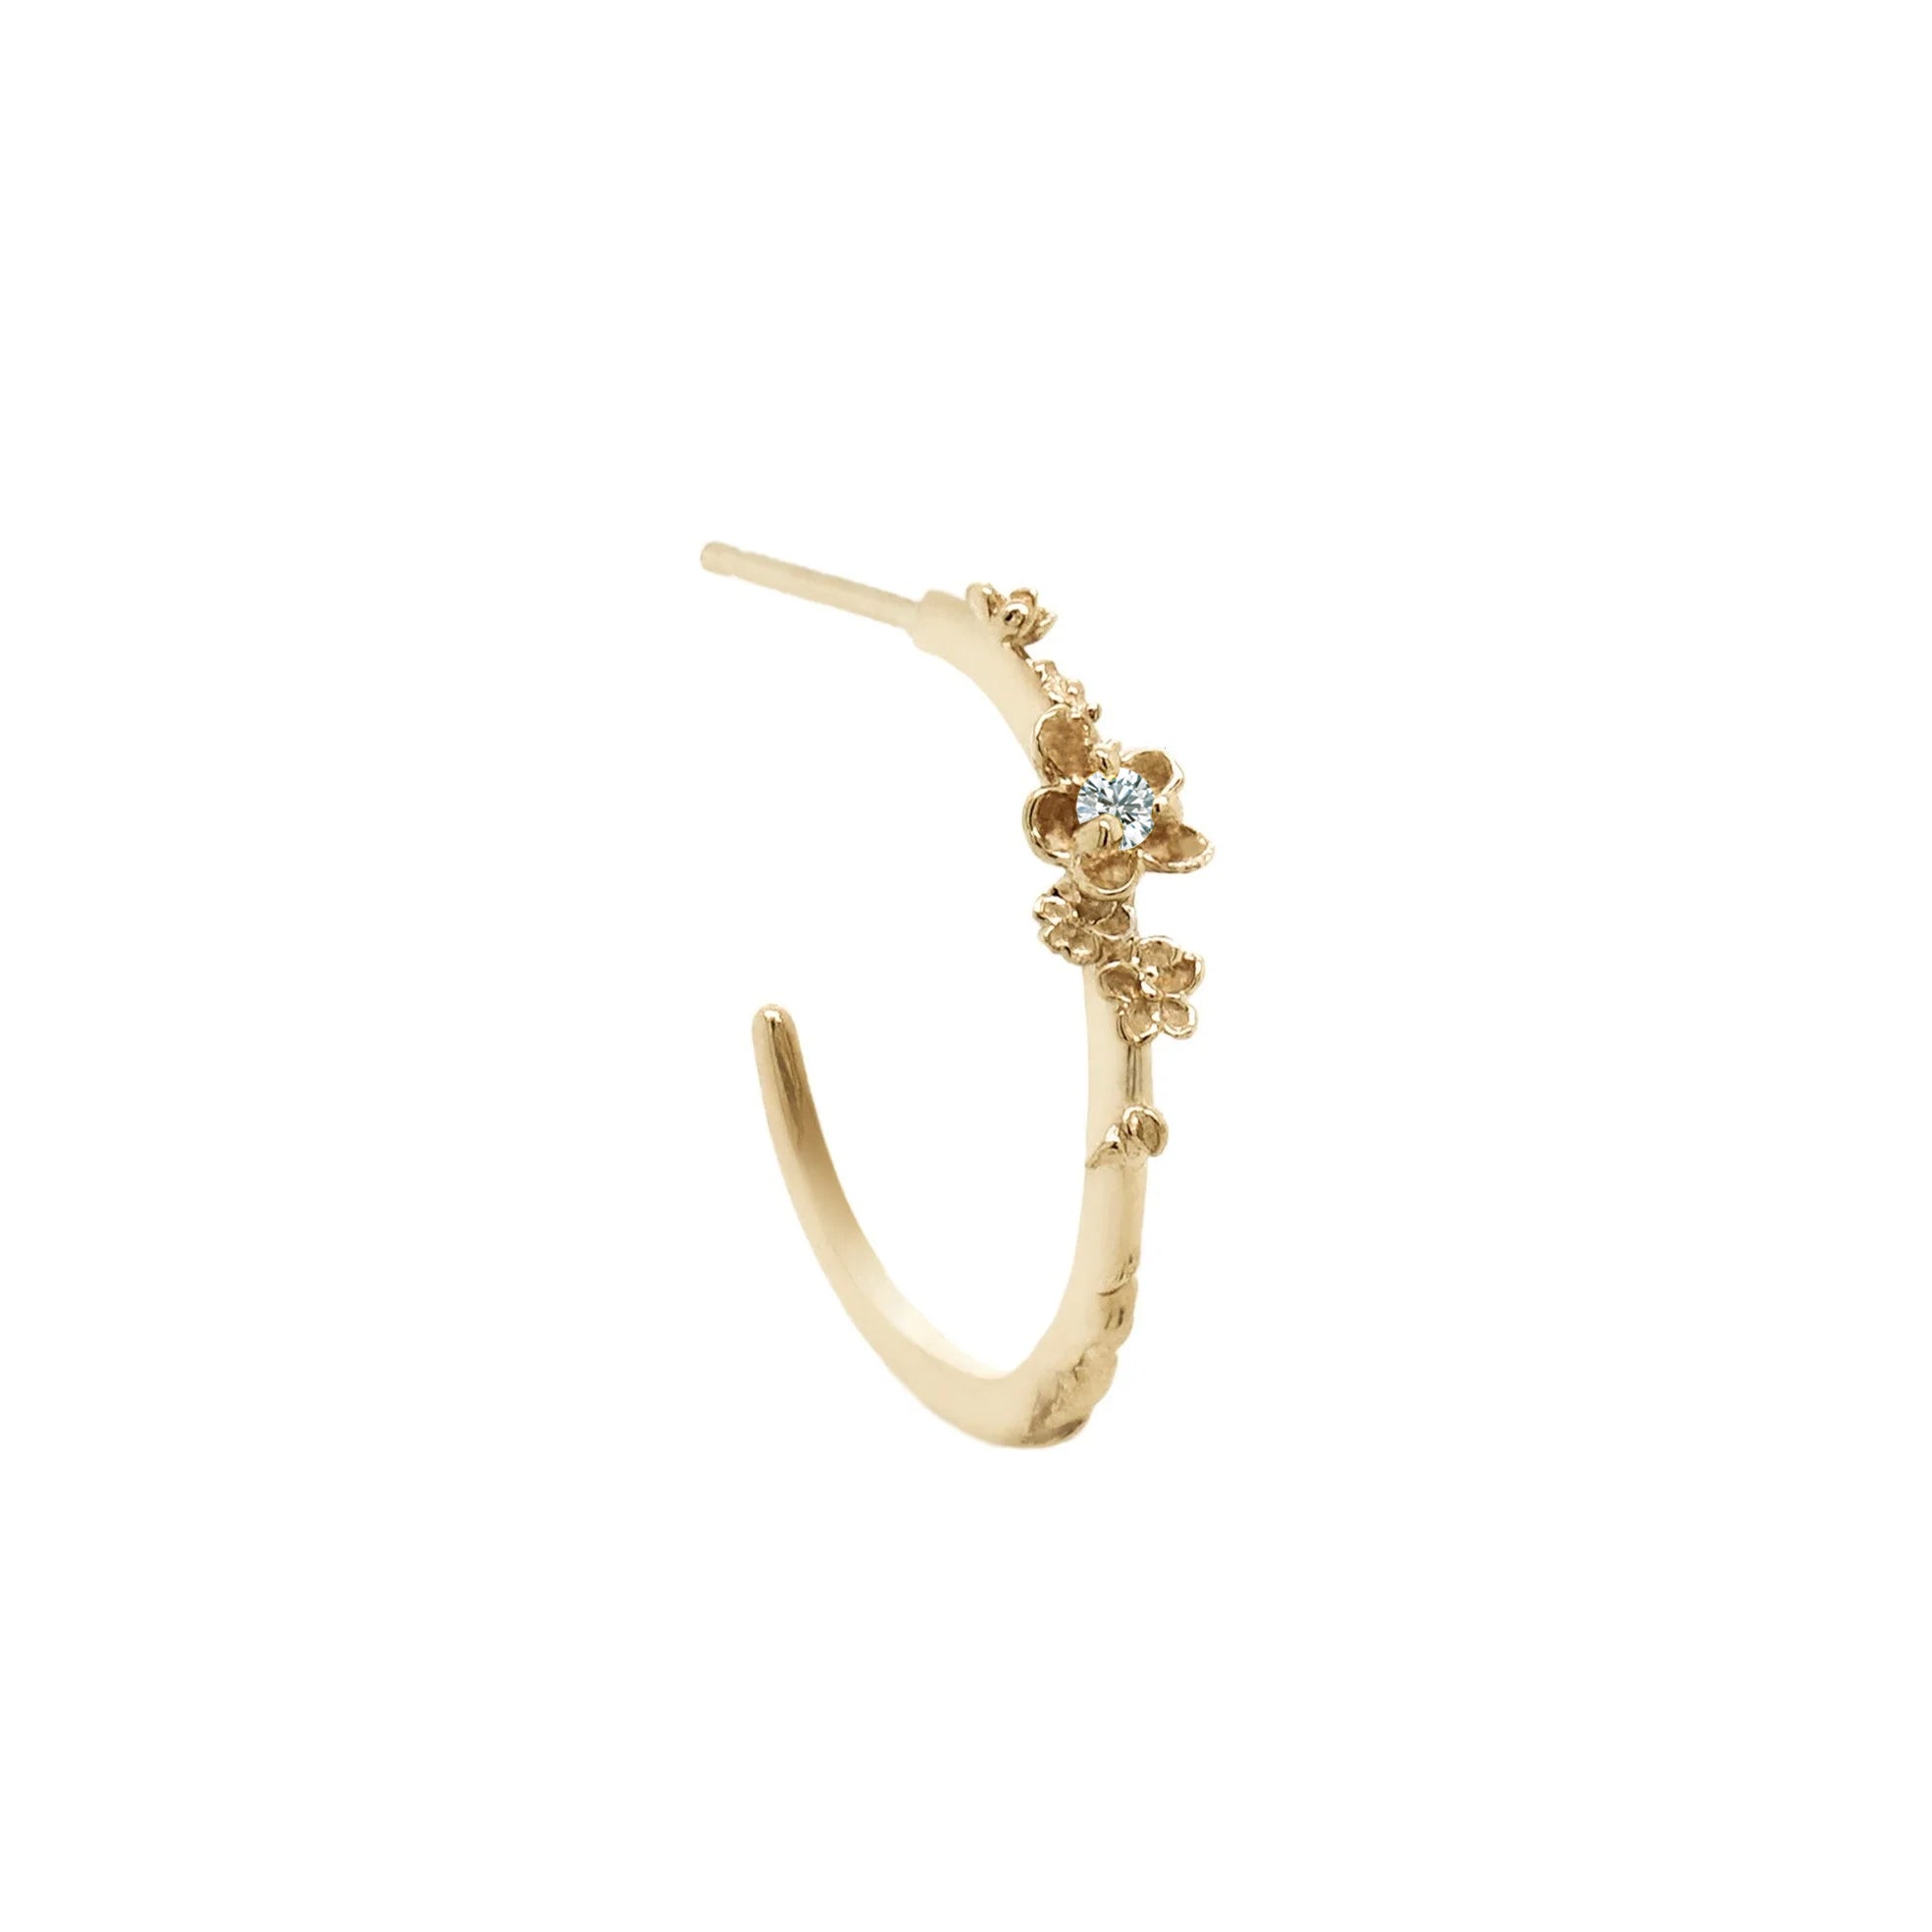 Laurie Fleming Jewellery "Large Buttercup Hoop" earring, featuring petite hand-carved buttercup flowers with a diamond centre. The earring is on a white background.